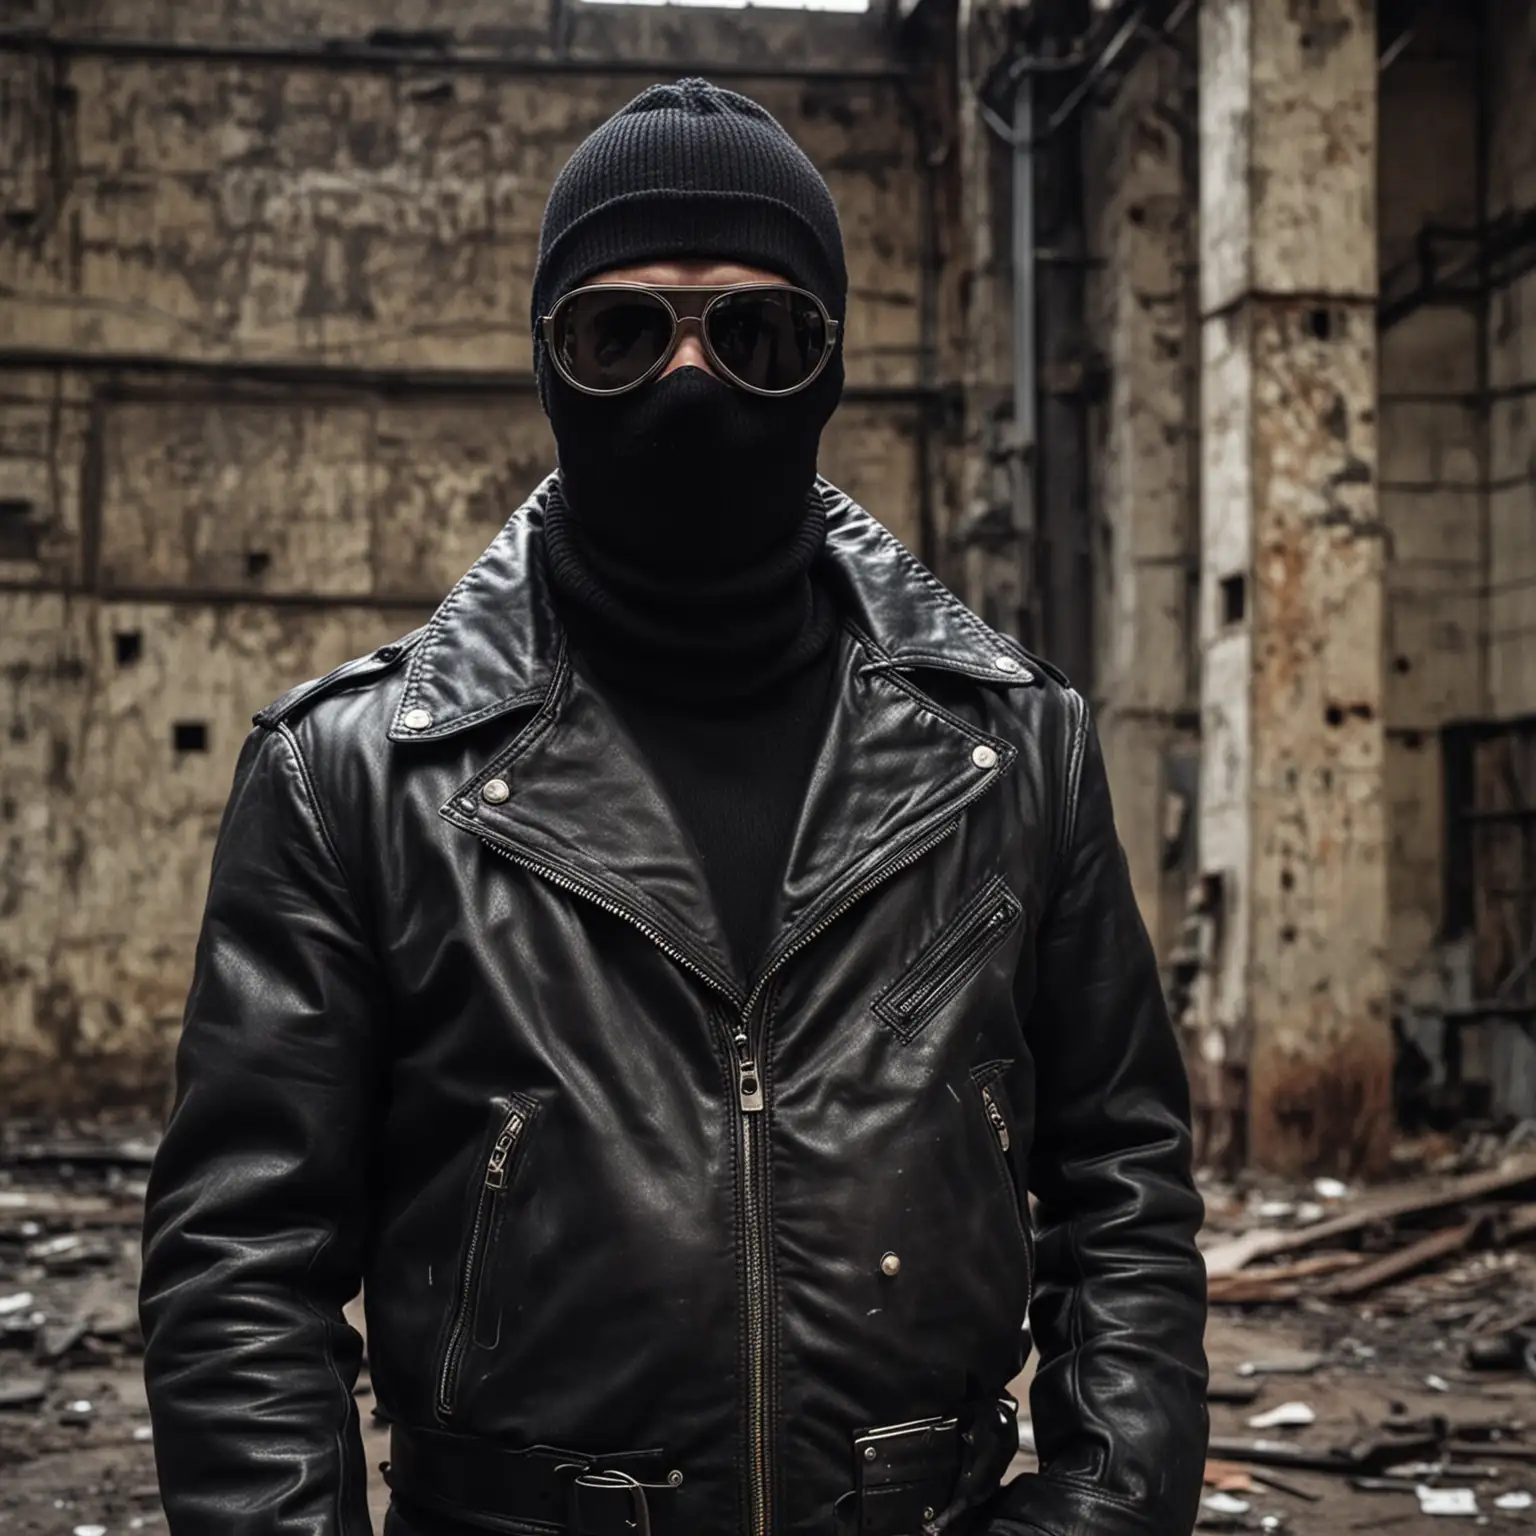 Angry Private Detective in Balaclava and Sunglasses at Abandoned Dark Factory